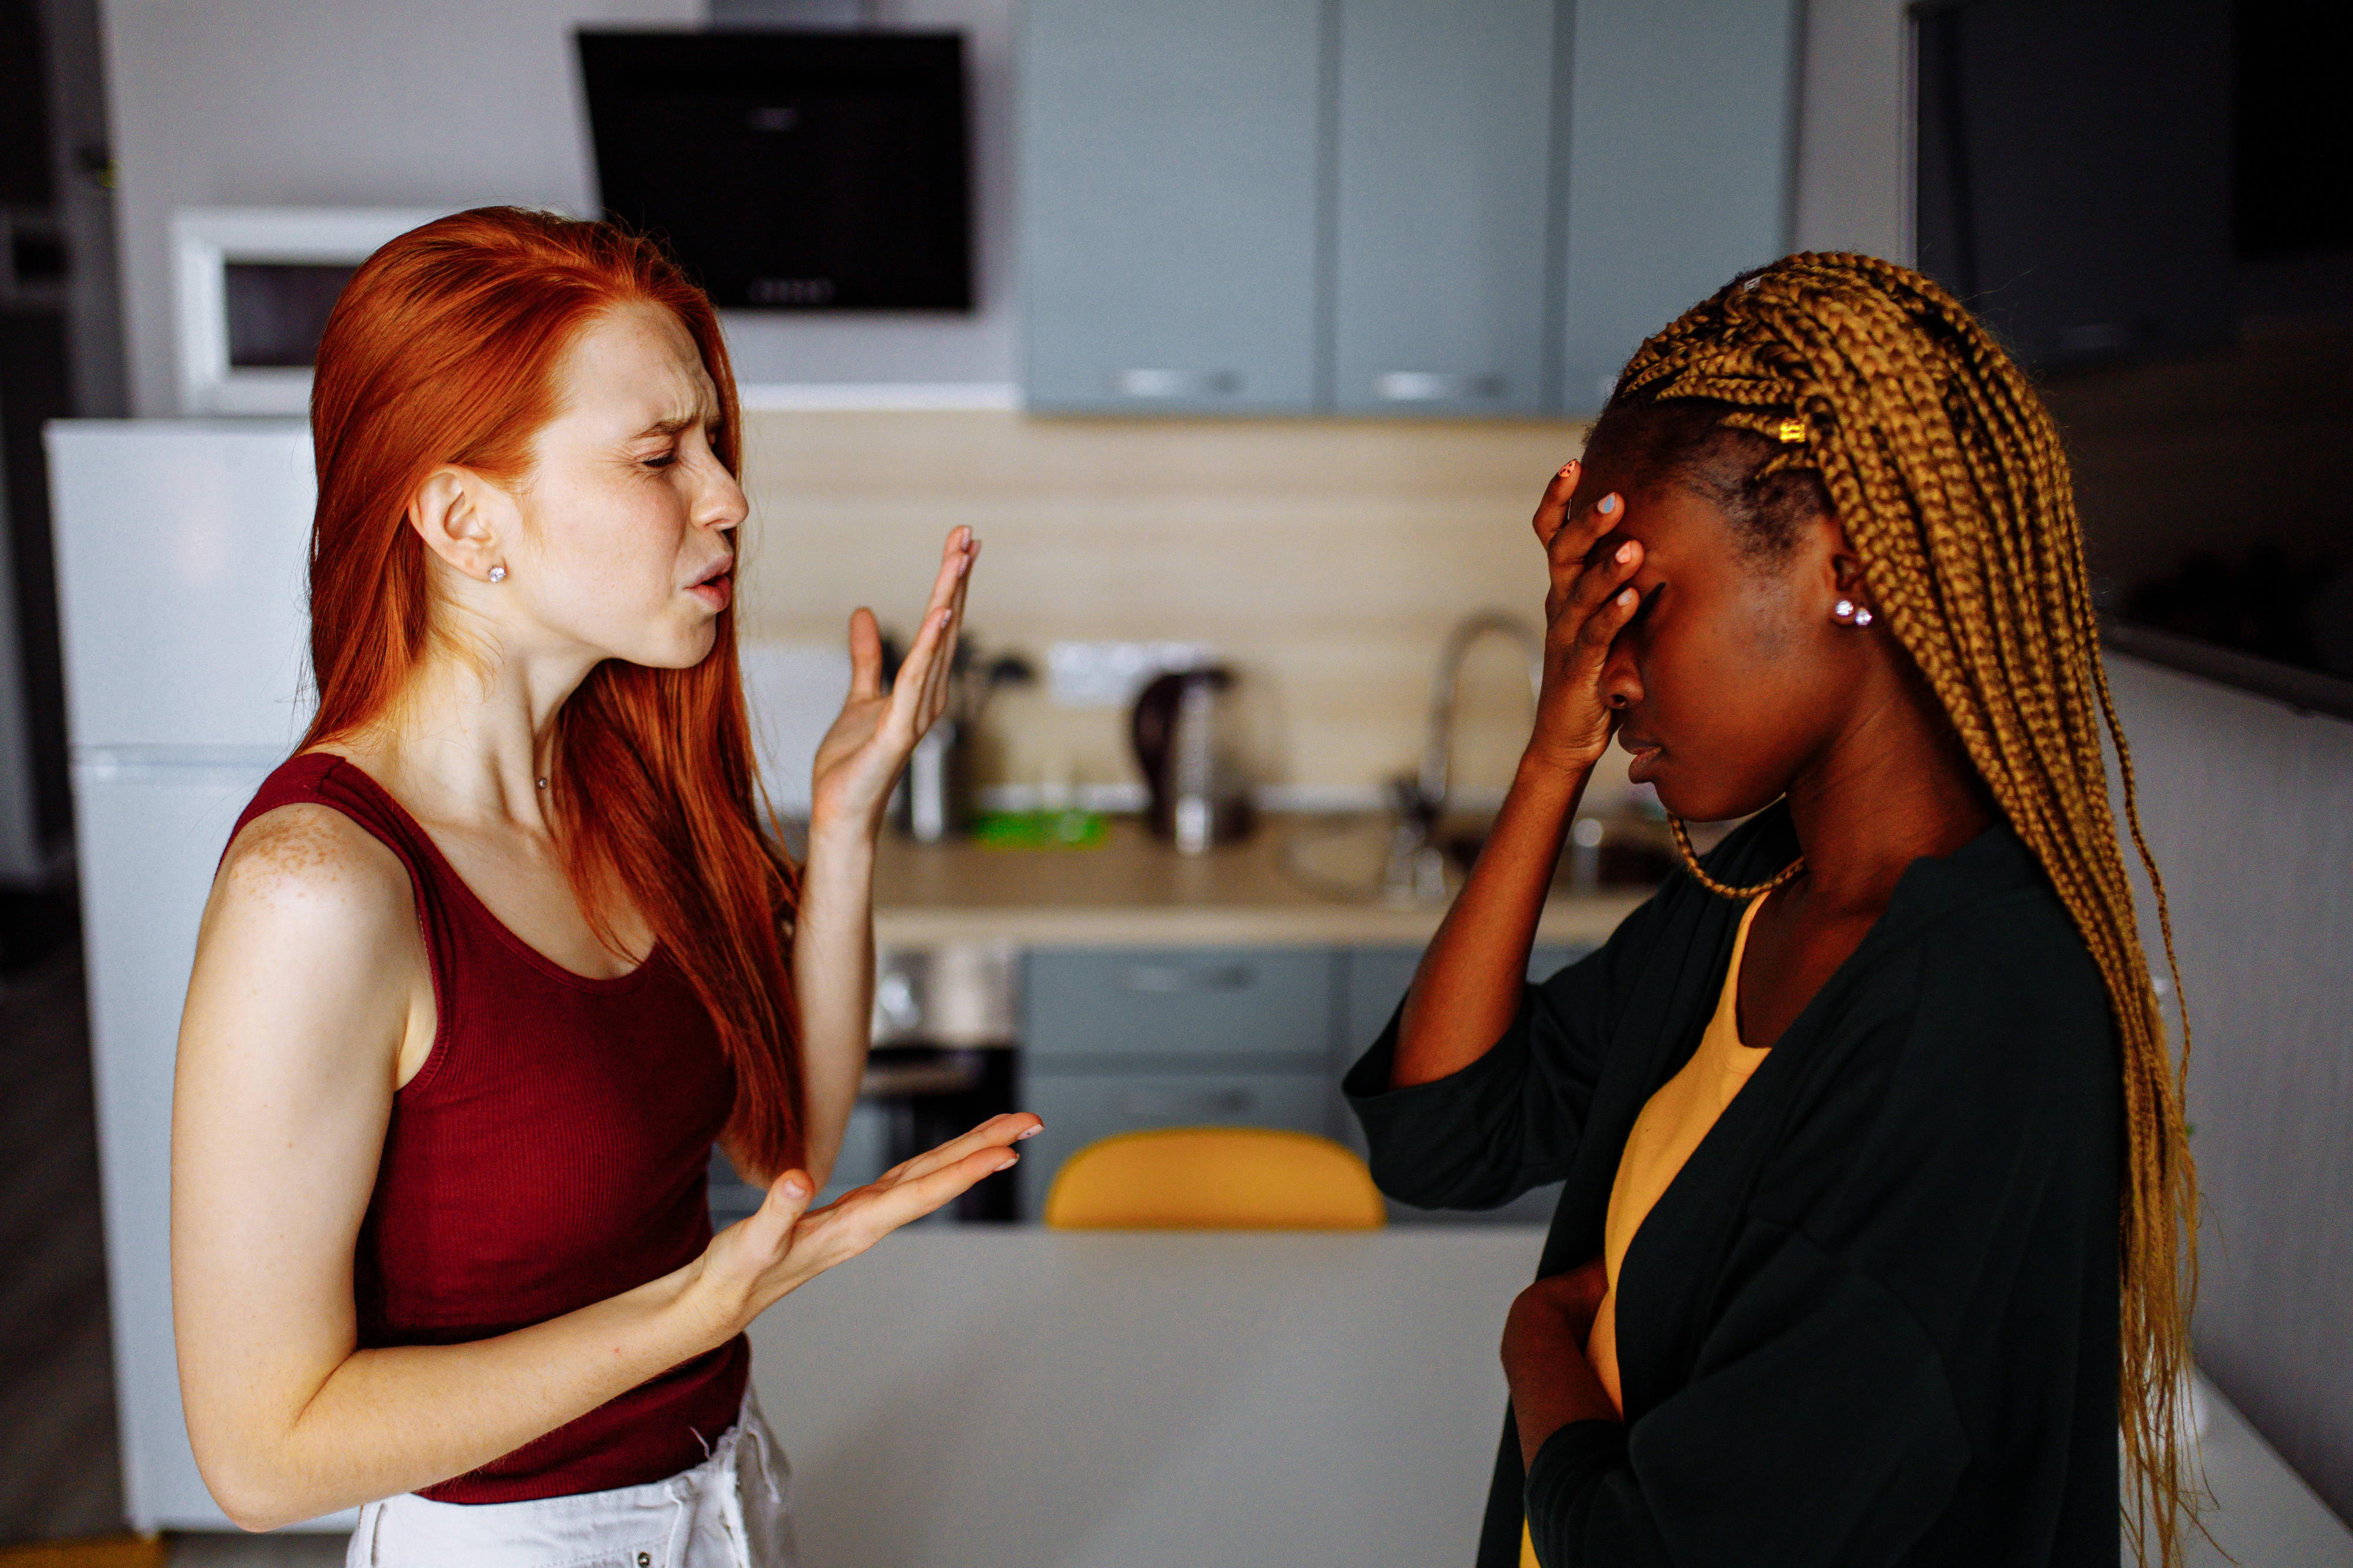 Two women in a kitchen appear to be having a serious conversation